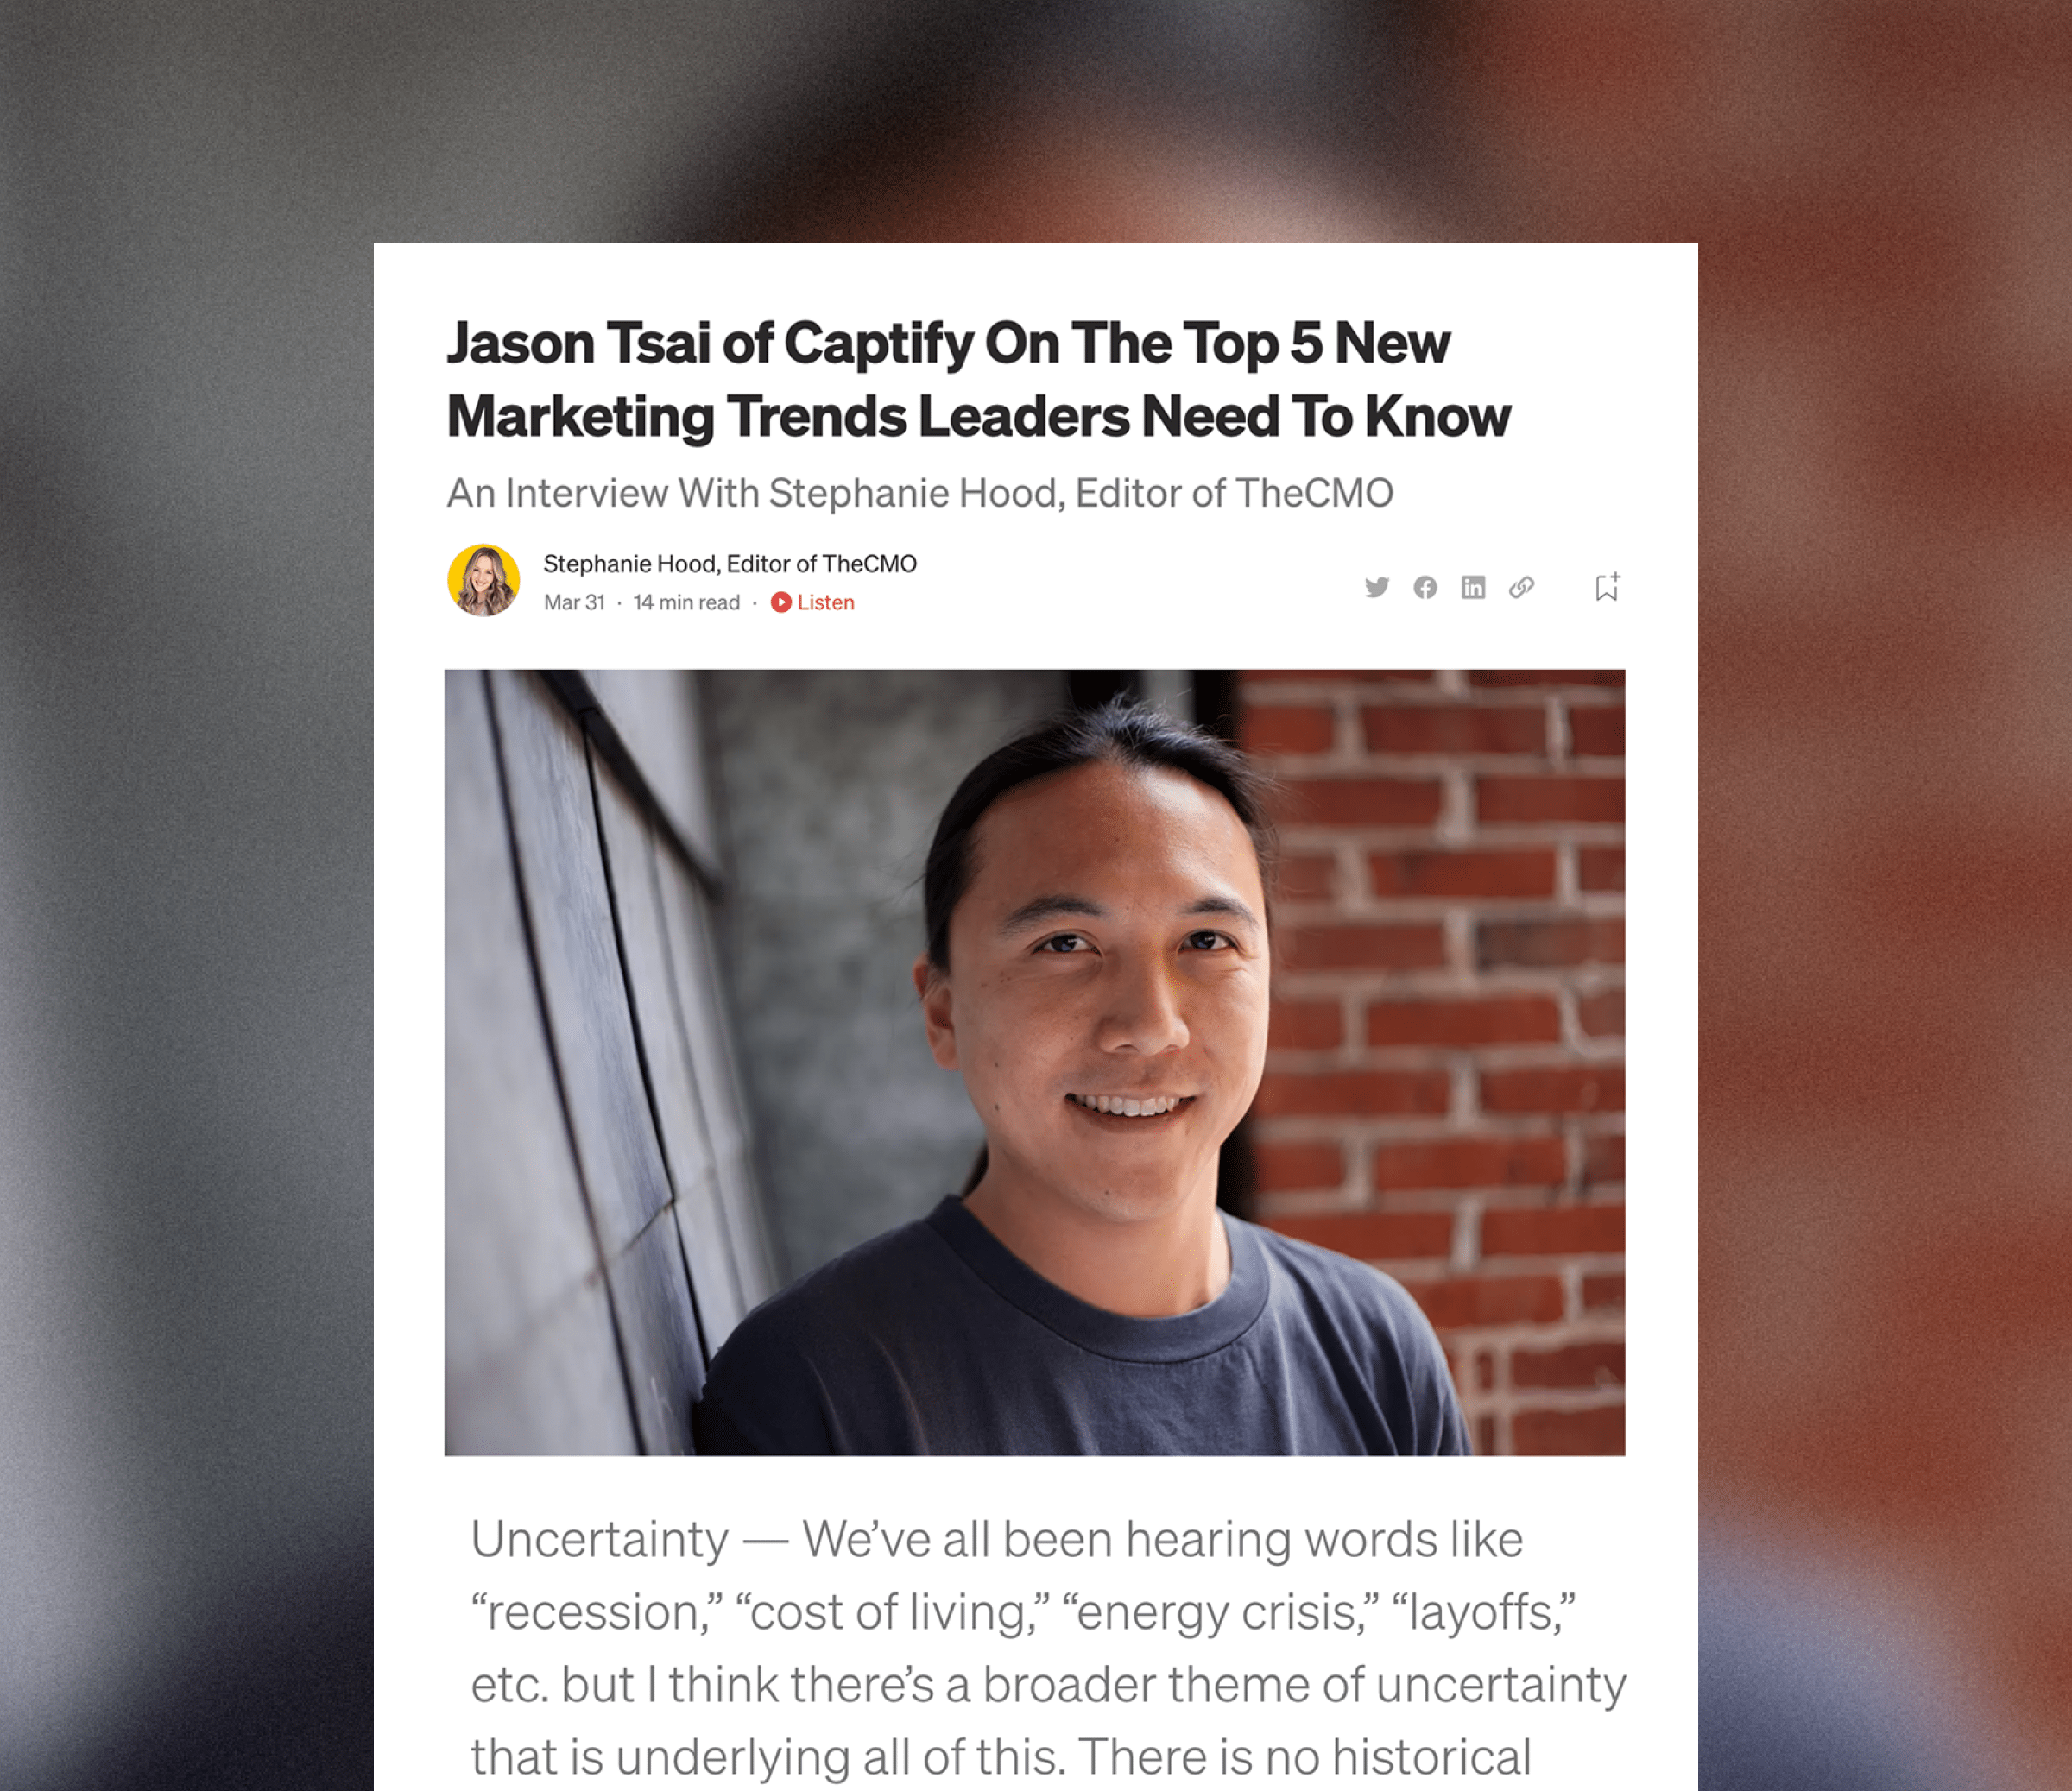 Authority Magazine: Captify’s Jason Tsai On The Top 5 New Marketing Trends Leaders Need To Know